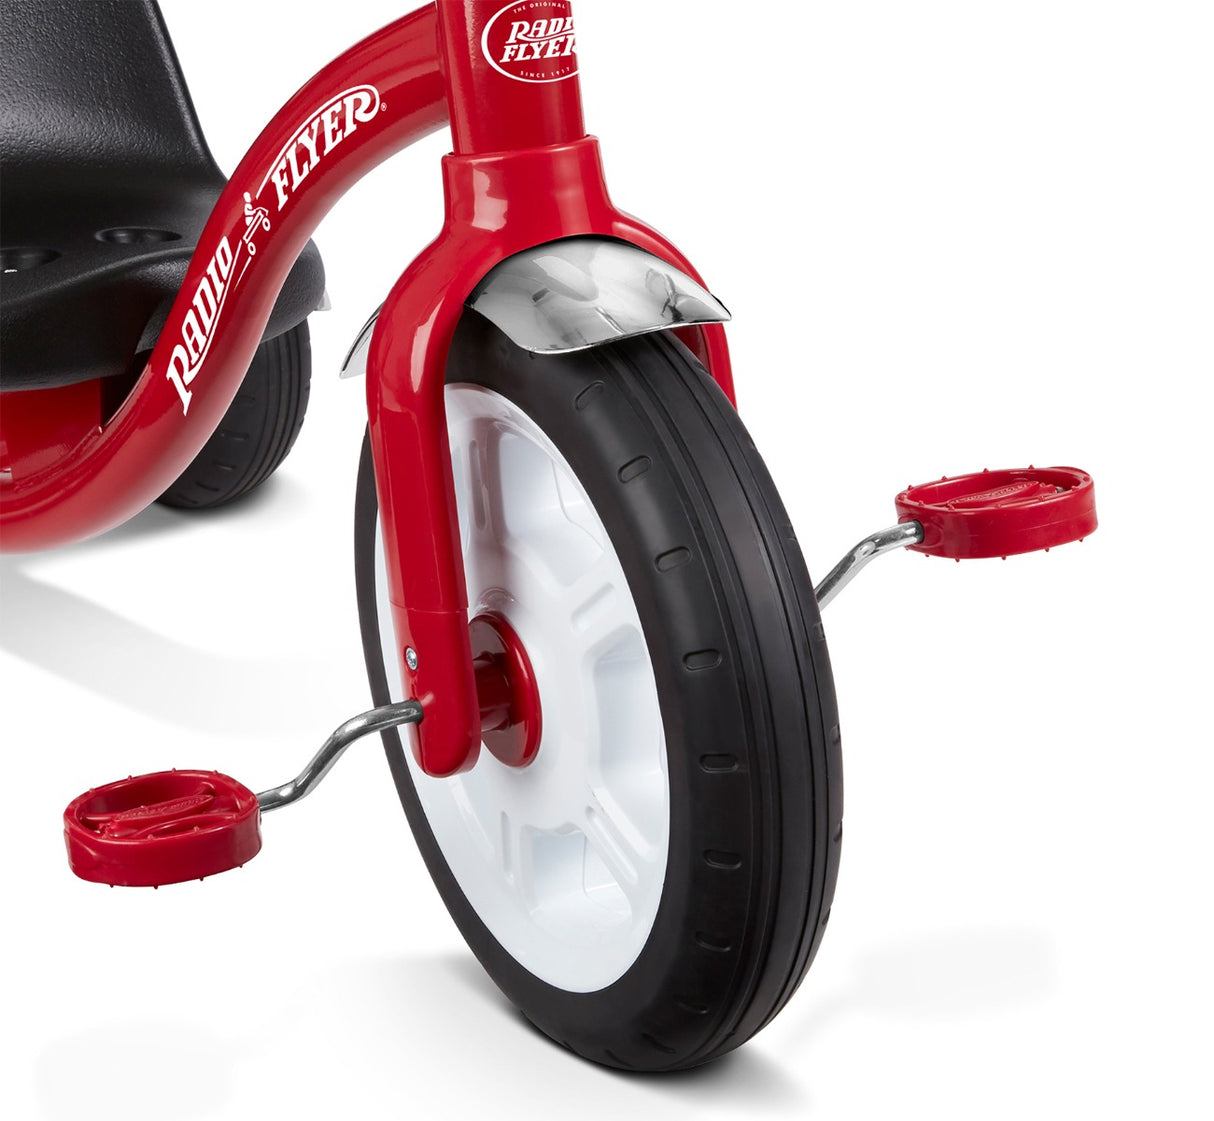 Big Red Classic Tricycle Large 12 inch front tire